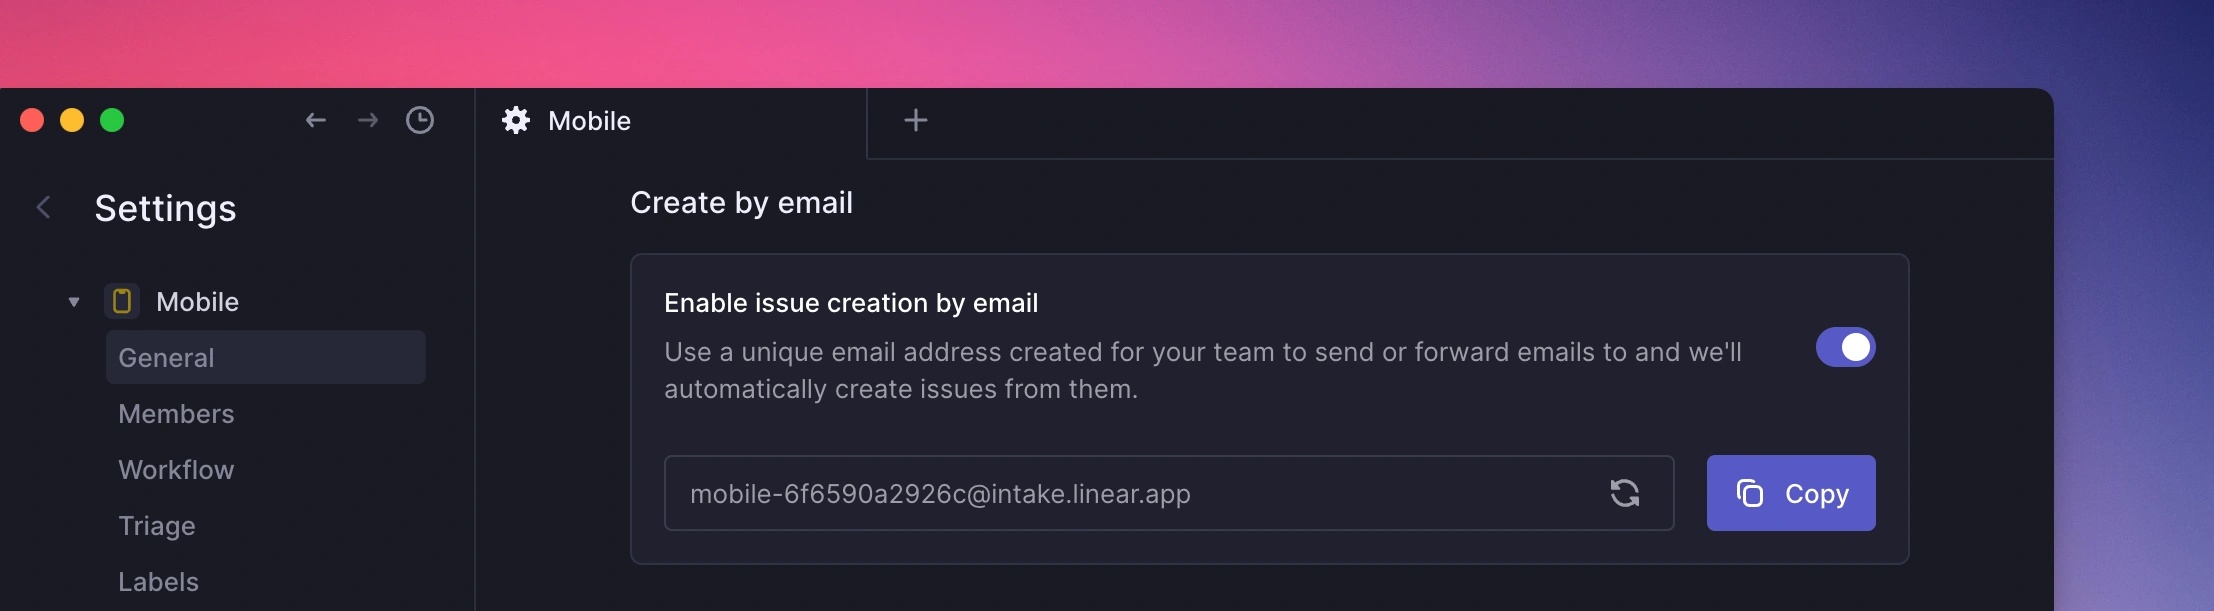 Create by email